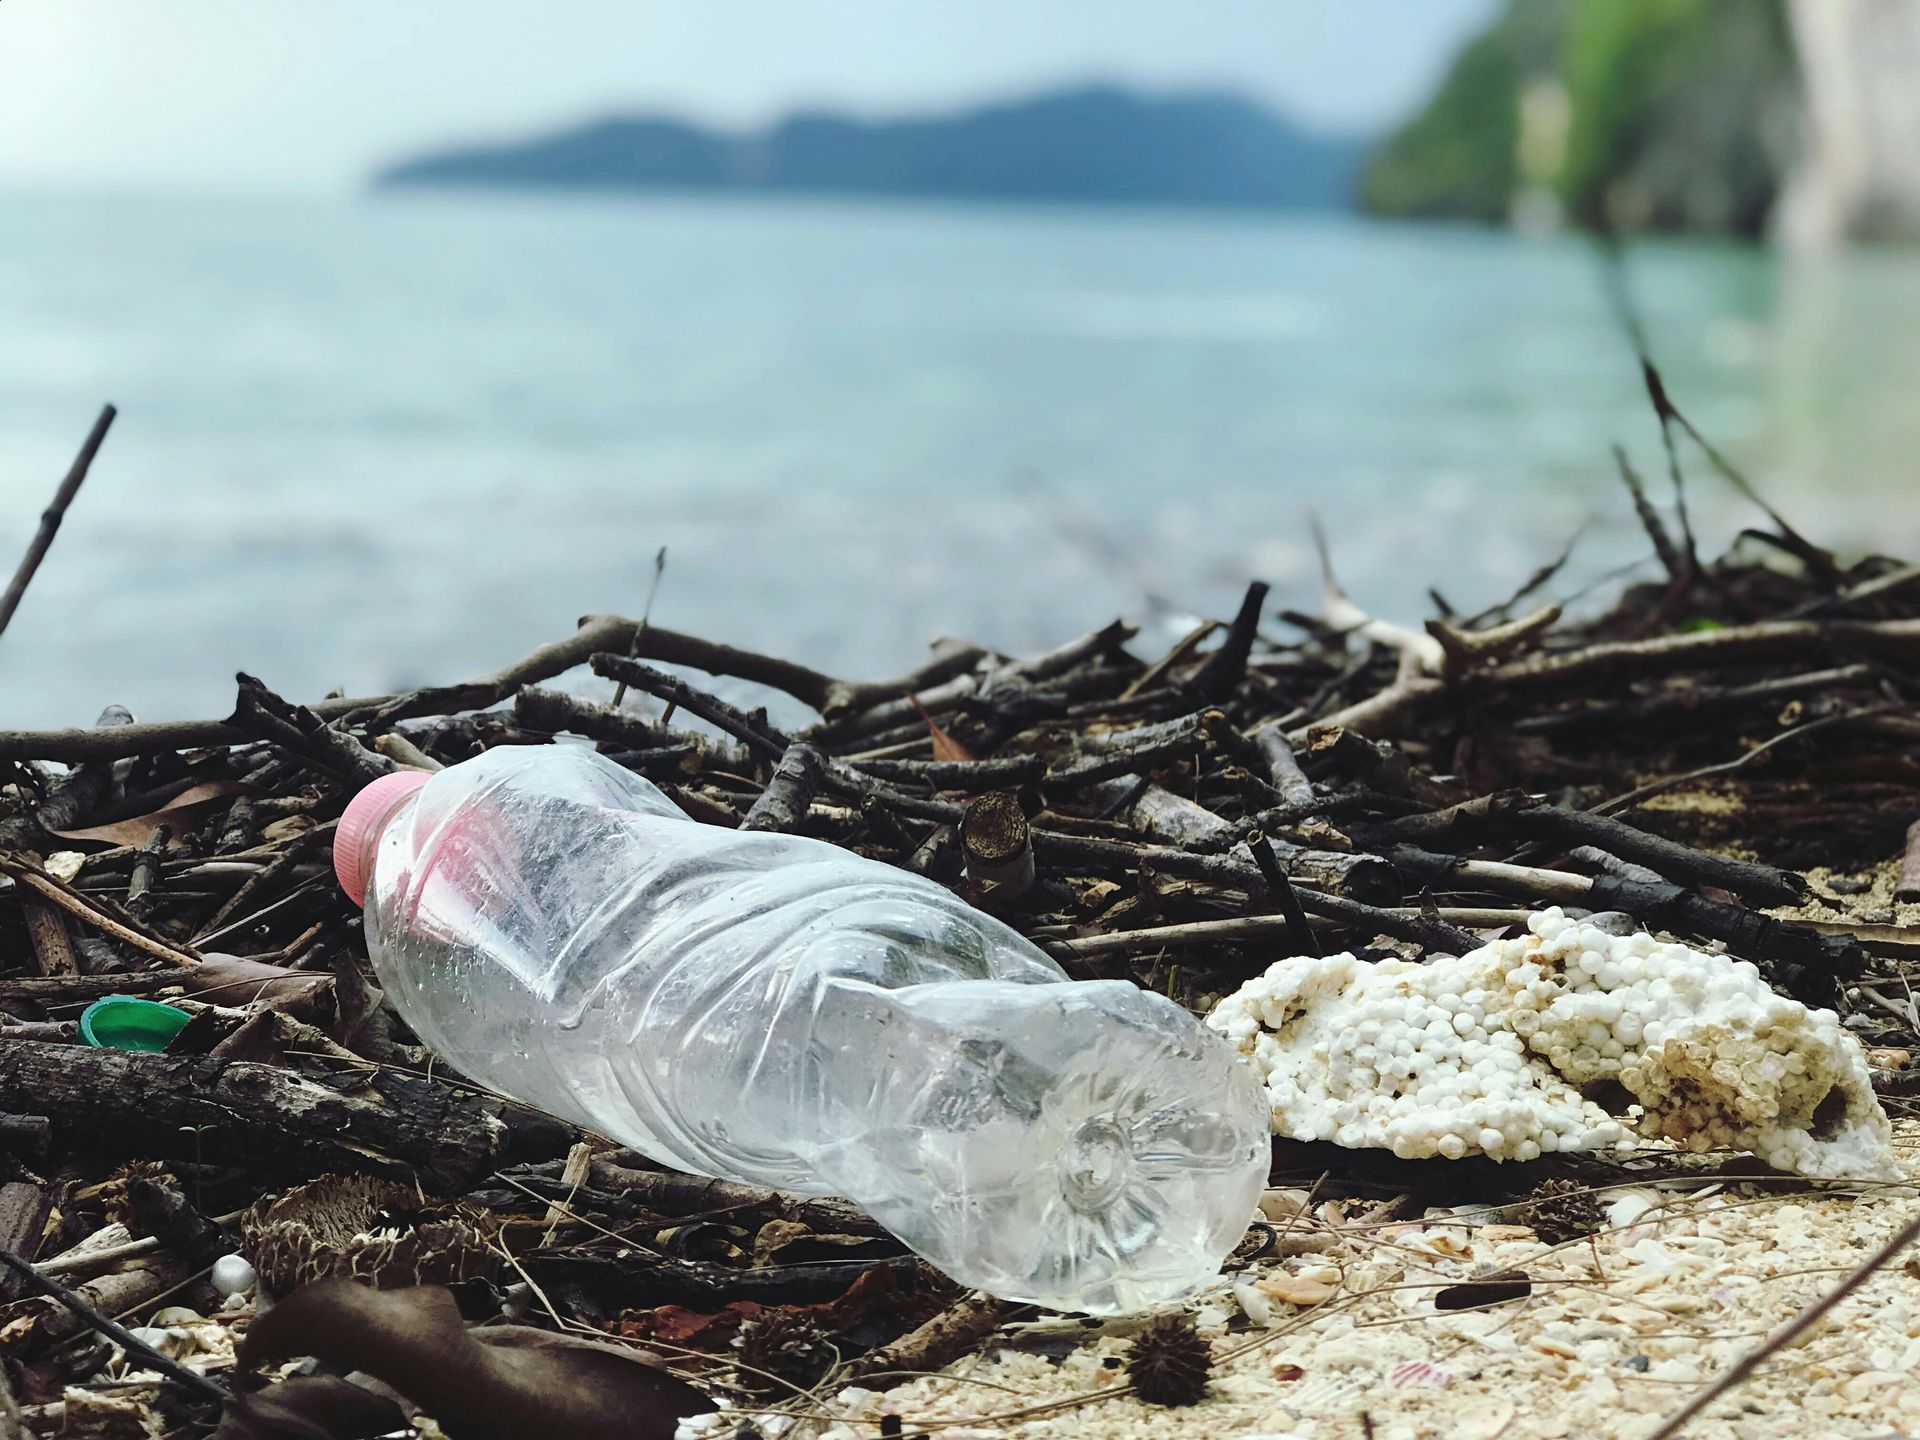 A plastic water bottle washed up by the sea